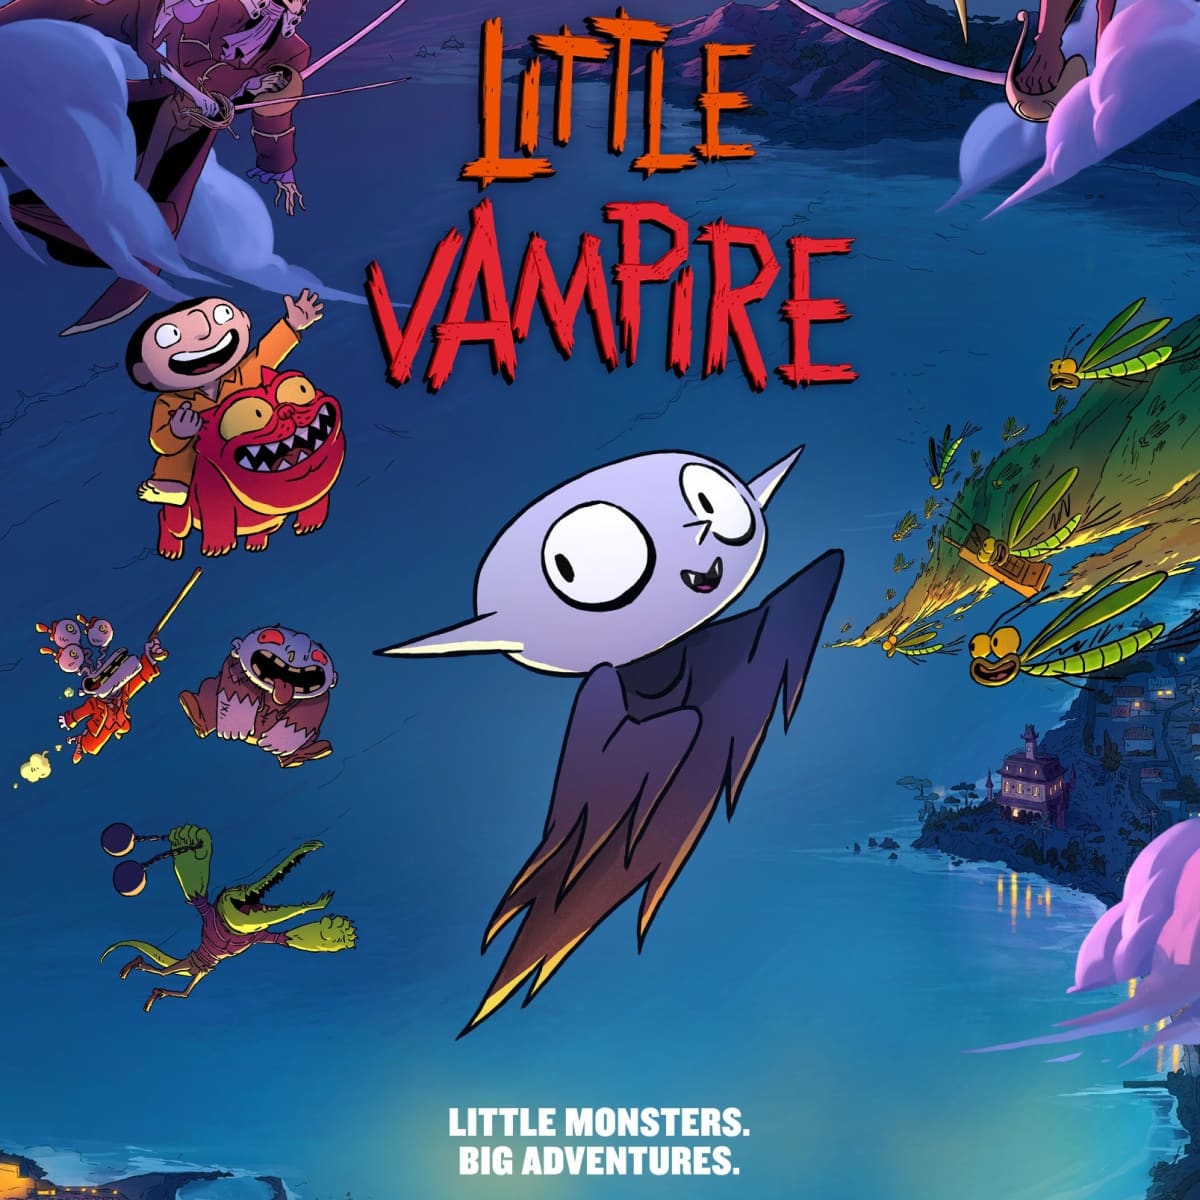 Watch First Trailer For Joann Sfar's 'Little Vampire,' A 'Love Letter To  Classic Animated Movies